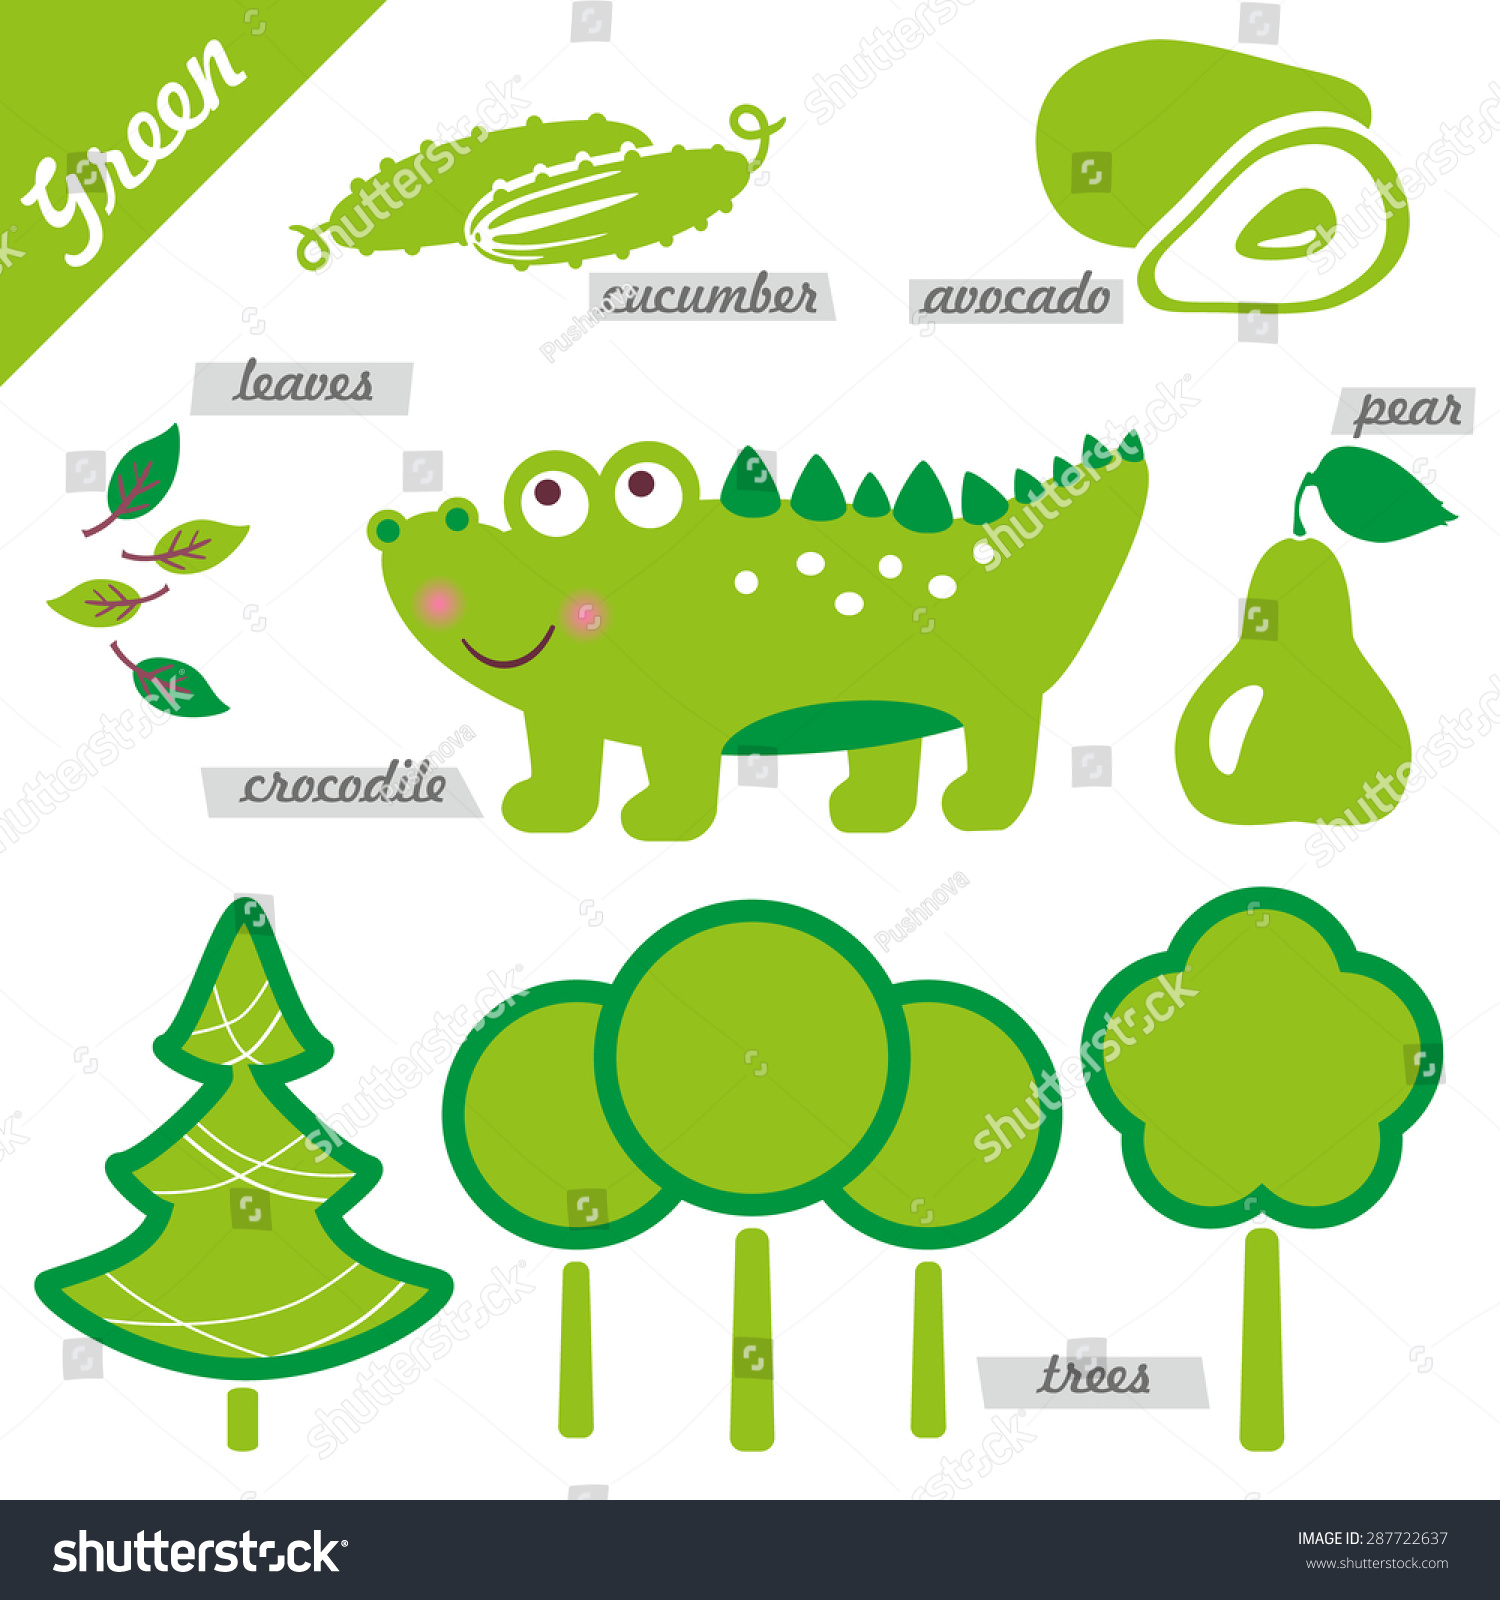 green things clipart - photo #22